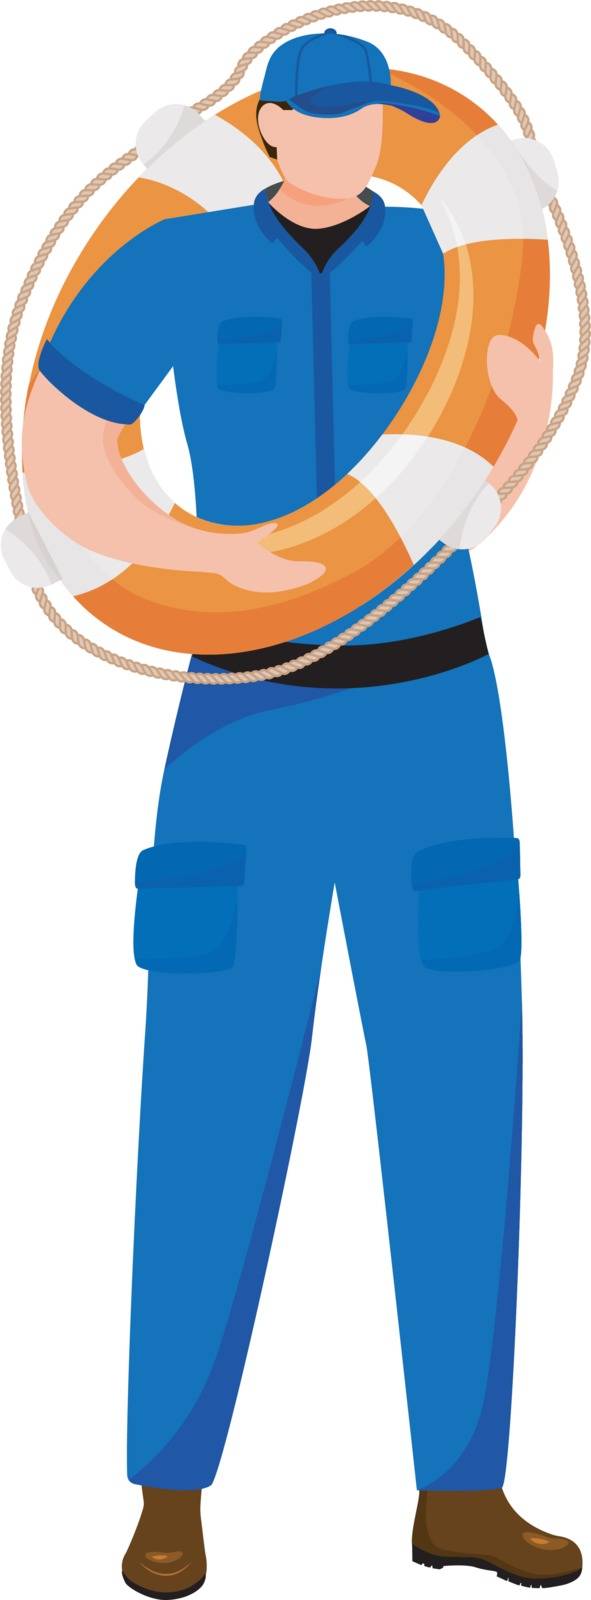 Coast guard flat vector illustration. Maritime security. Safety equipment. Marine lifeguard isolated cartoon character on white background